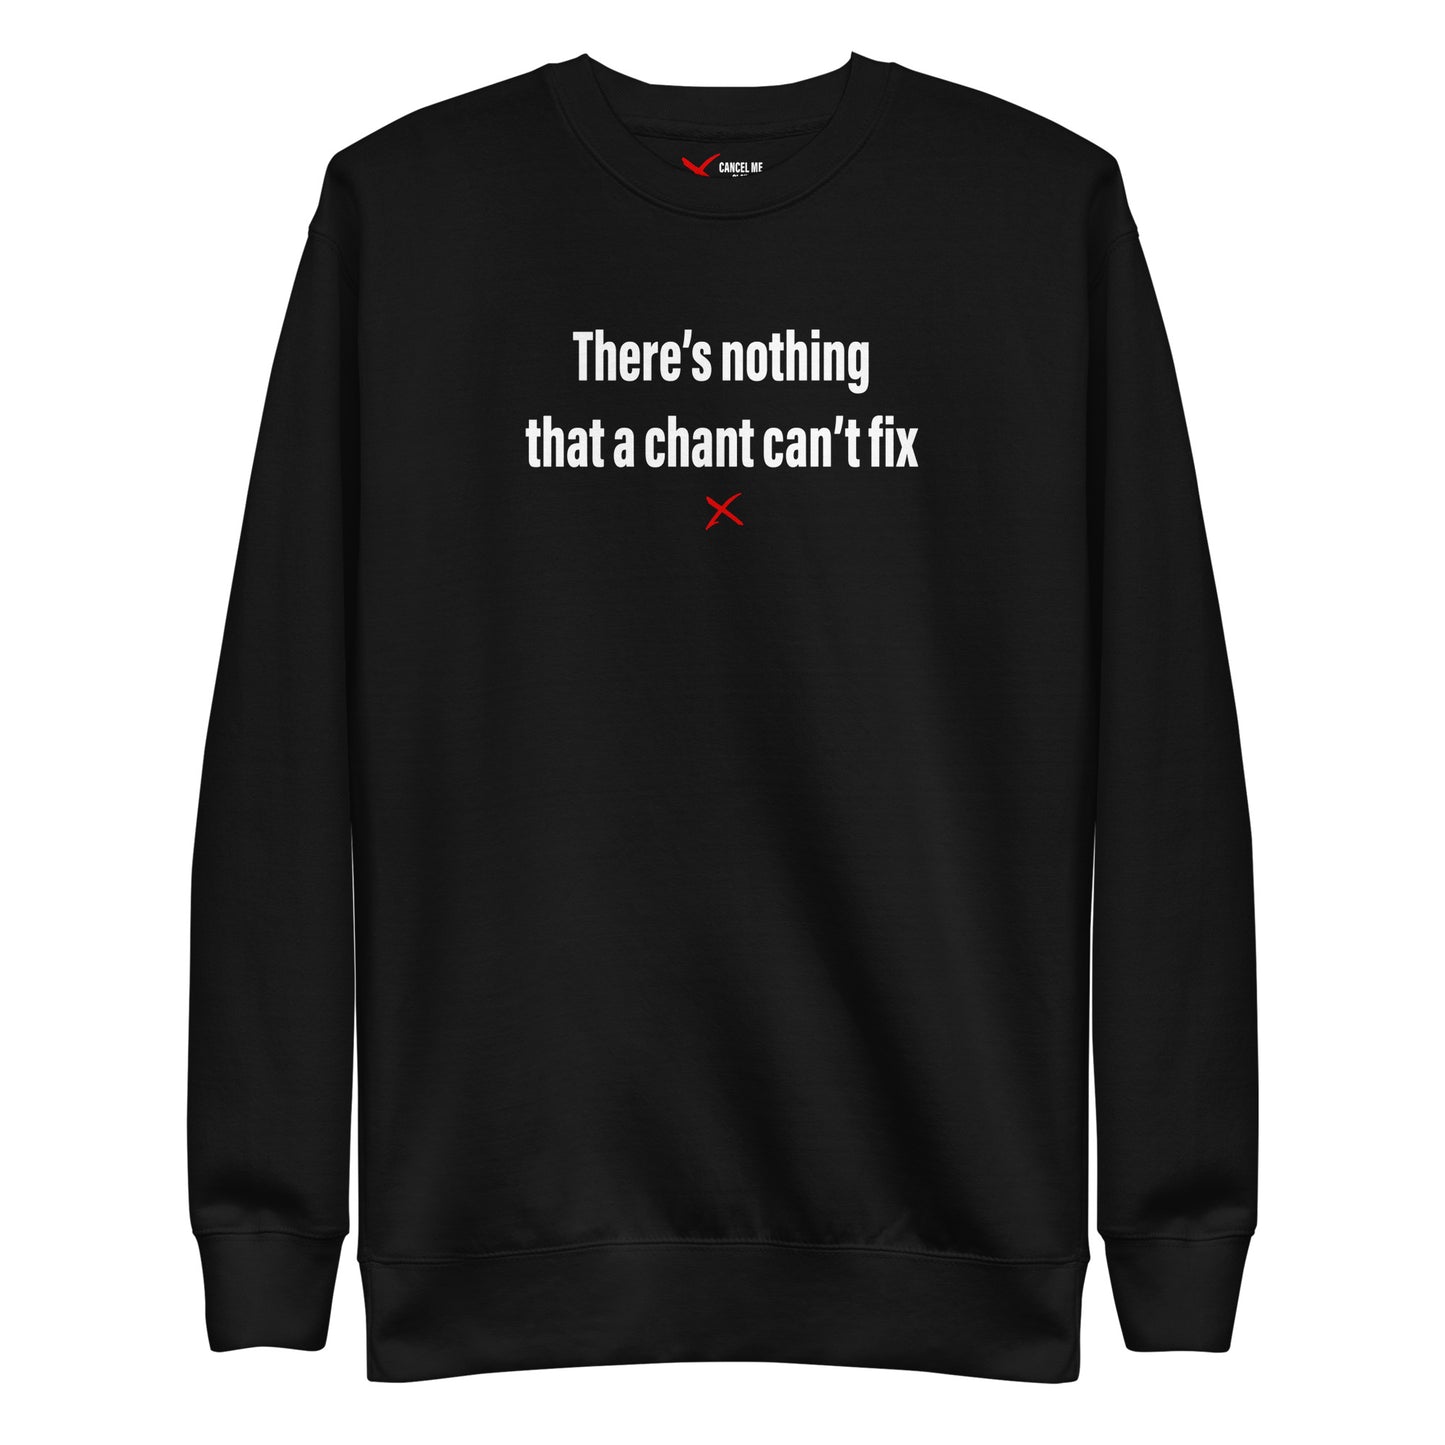 There's nothing that a chant can't fix - Sweatshirt